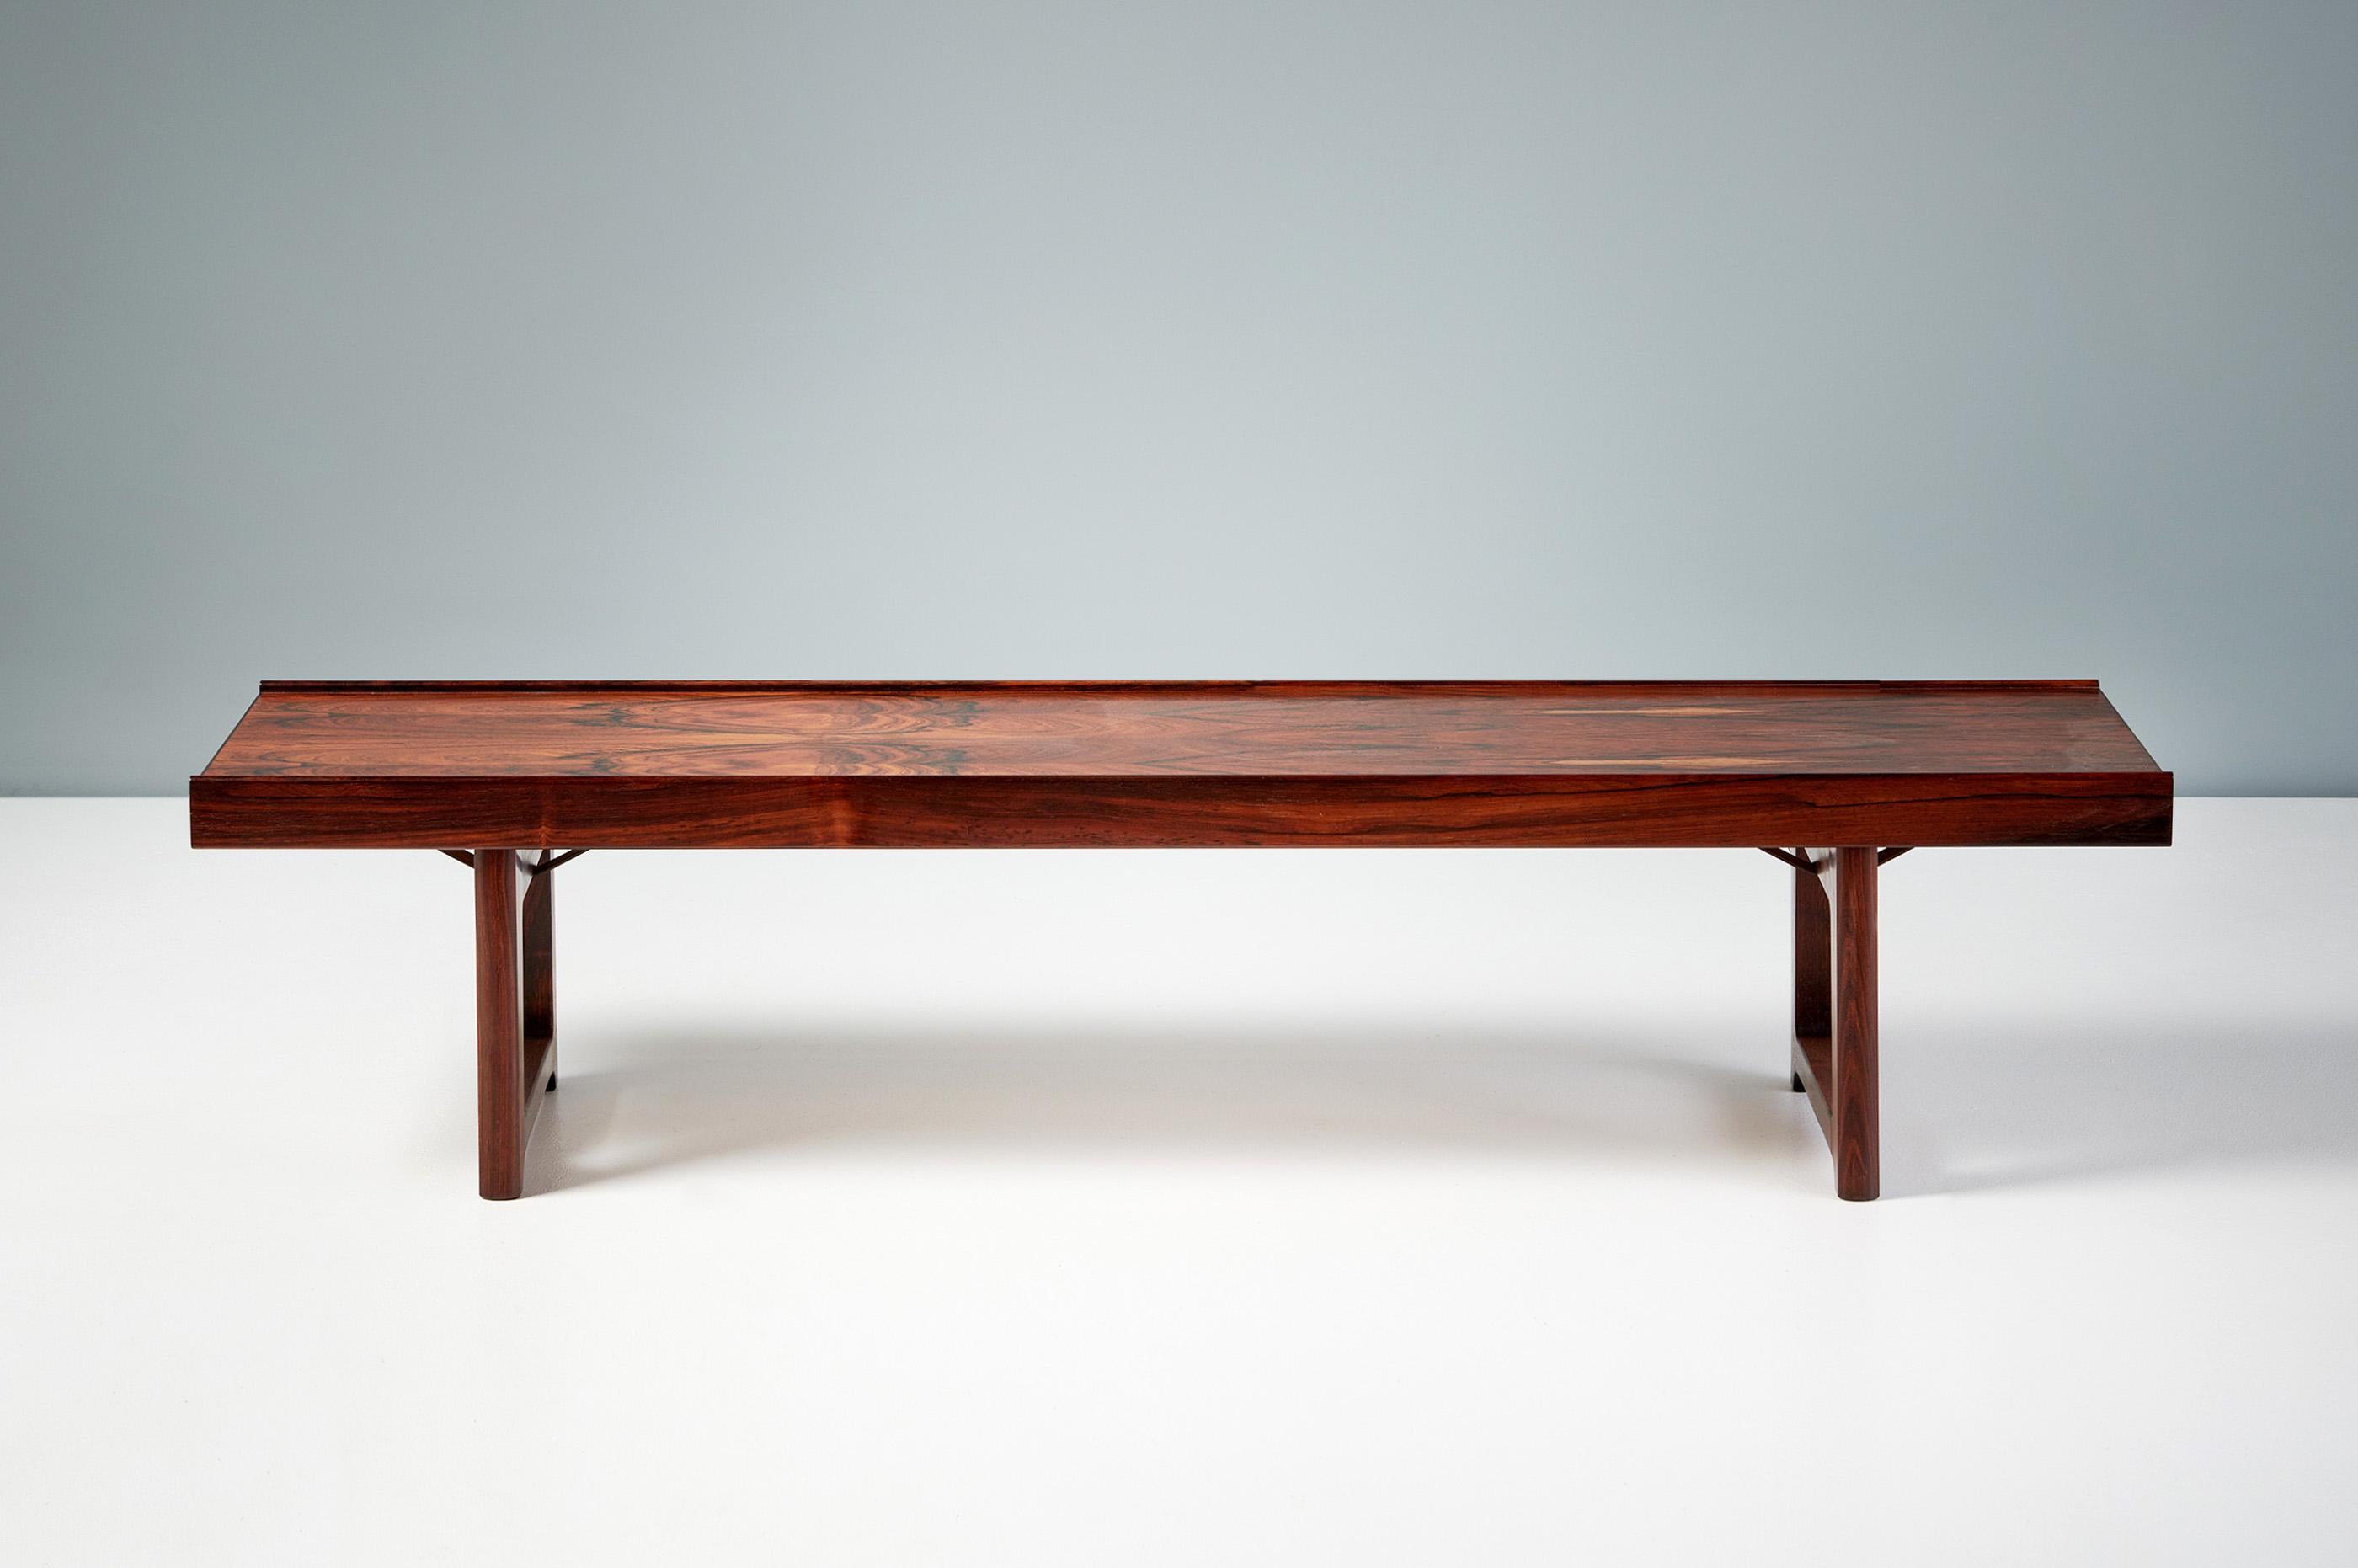 Torbjorn Afdal  - Krobo Bench, c1960

Highly figured rosewood bench or coffee table from Norwegian designer Torbjorn Afdal for Bruksbo. Produced c1960s with veneered top and solid legs.

H: 34cm  /  D: 37cm  /  W: 150cm 
 